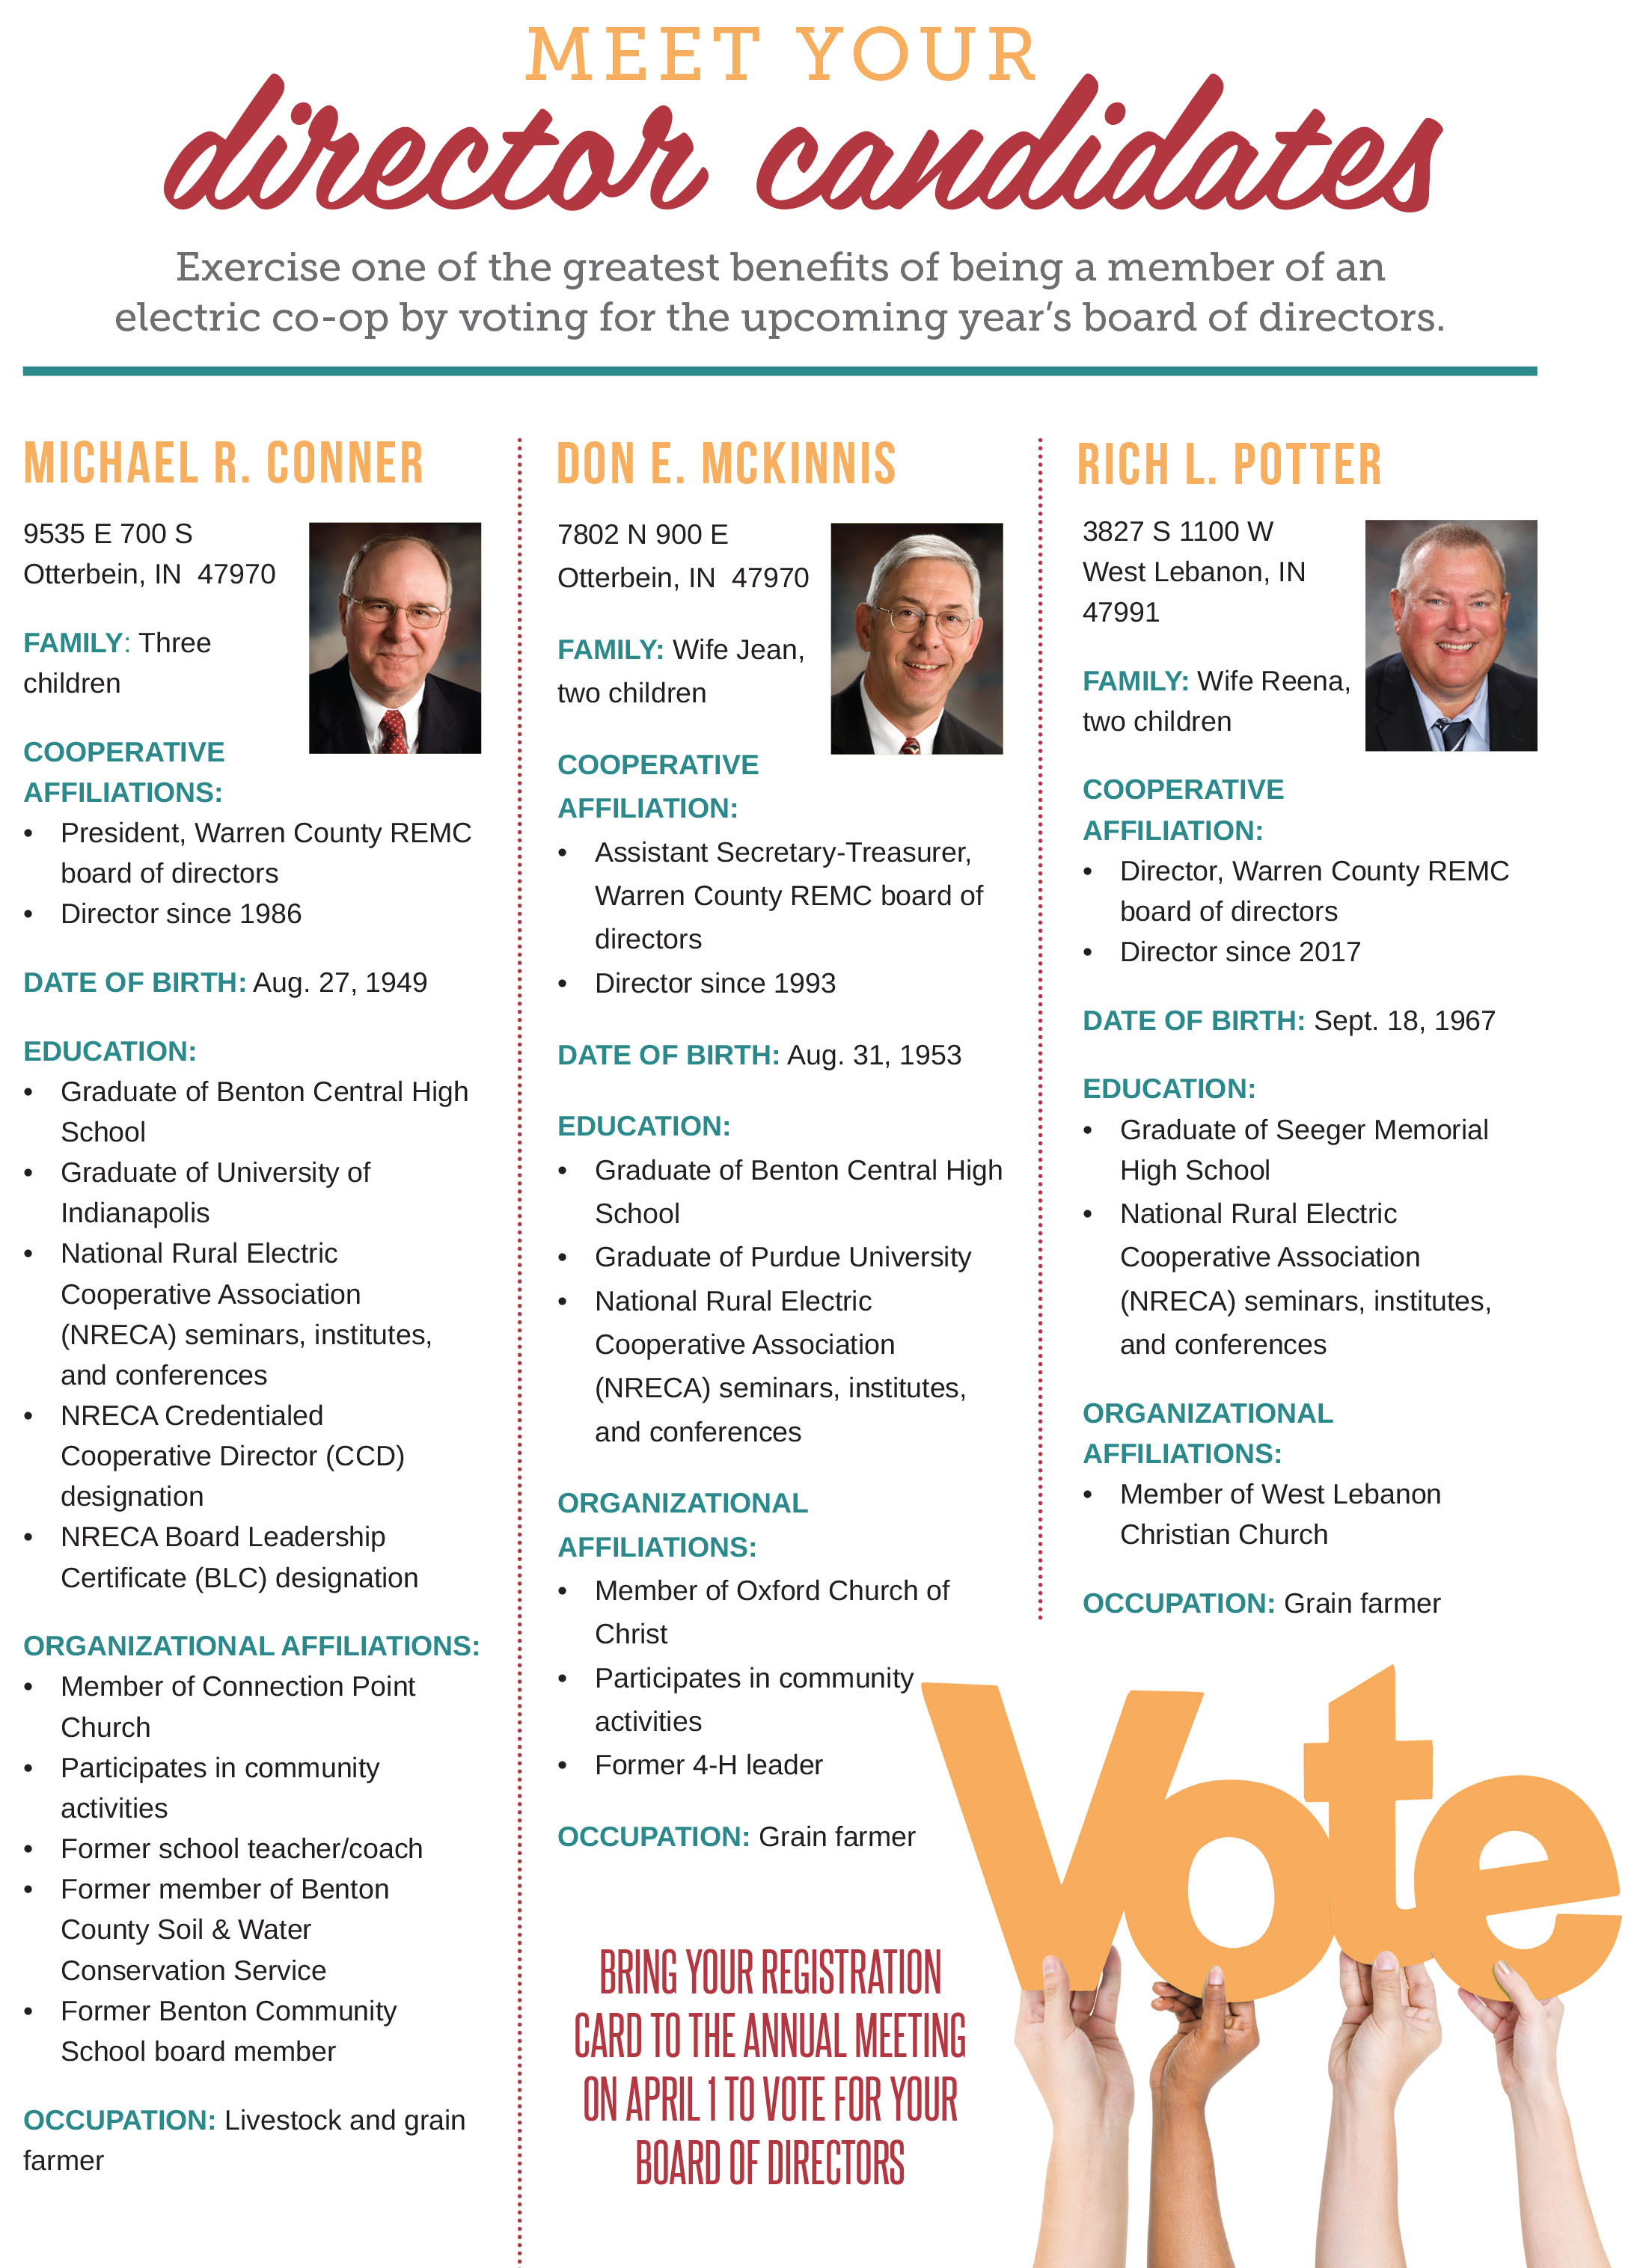 Graphic of board candidates